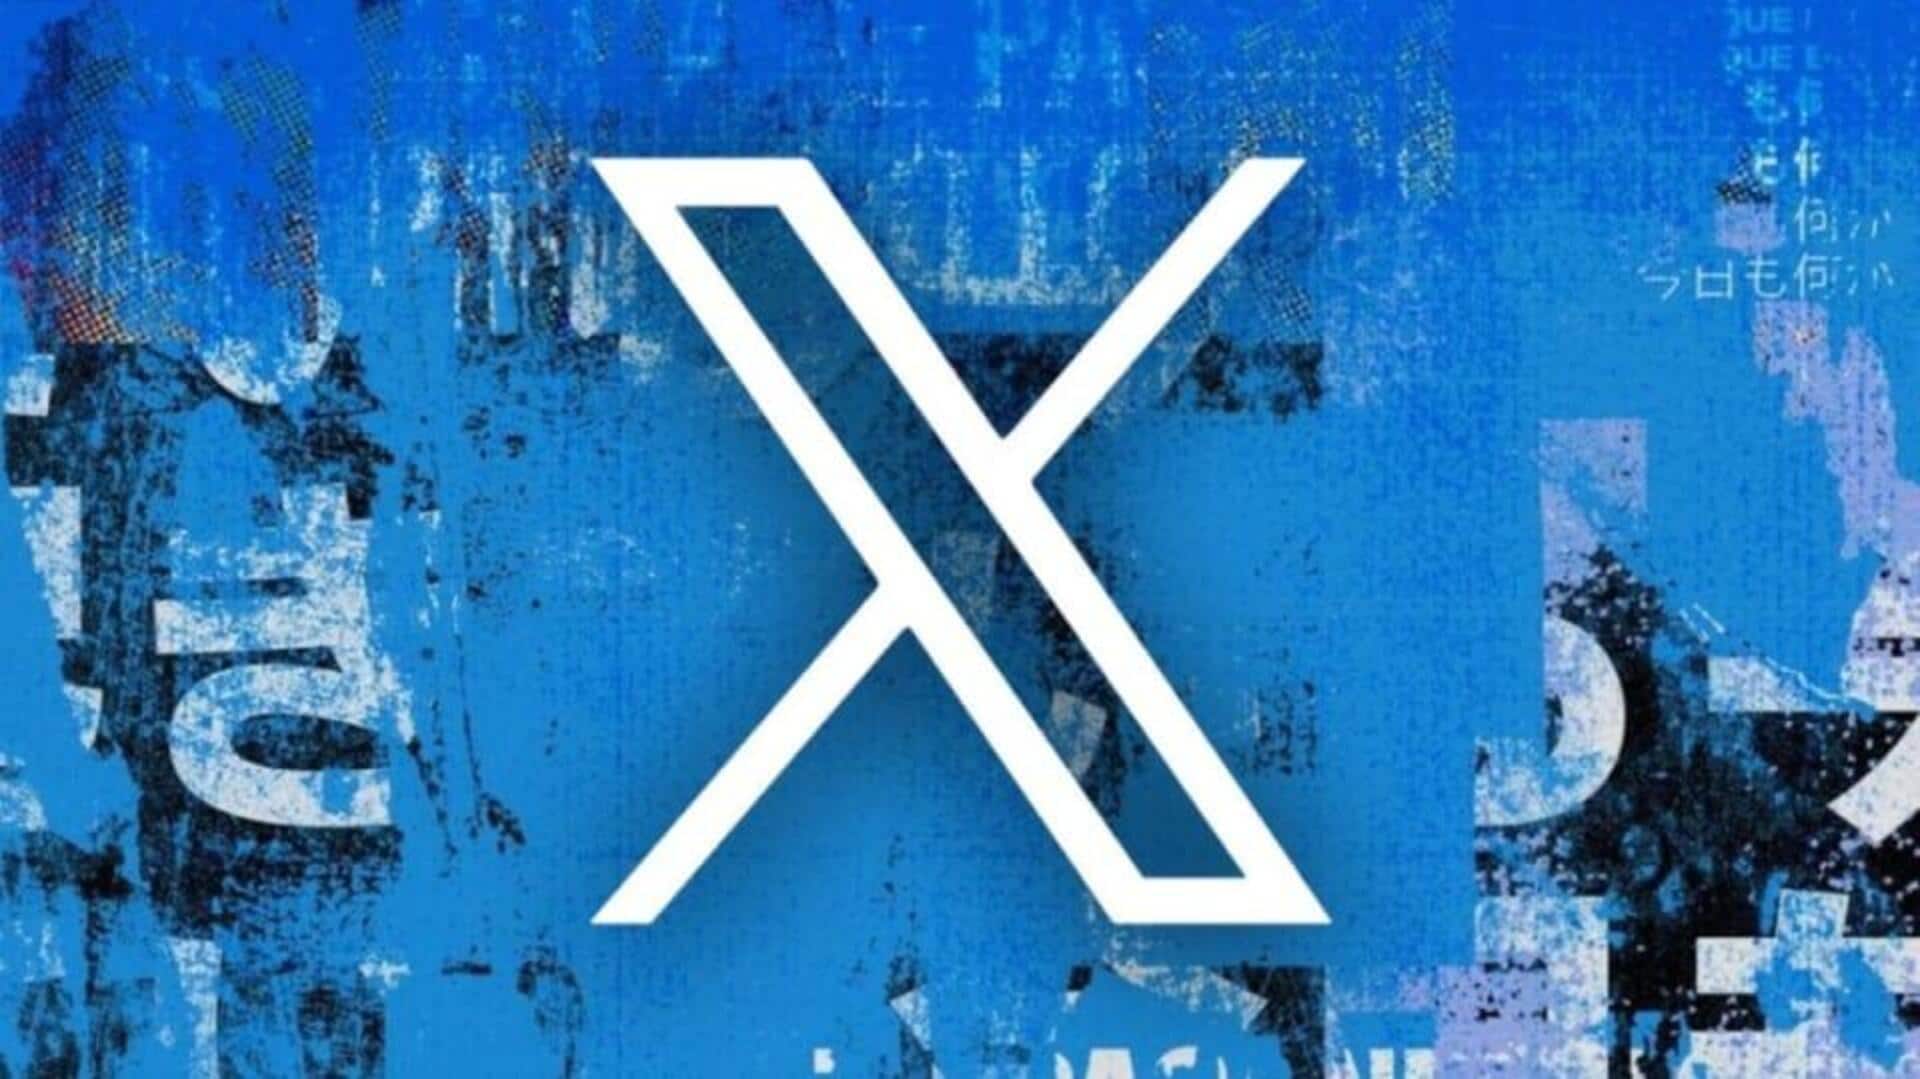 X gains over 10mn users this December amid advertiser exodus